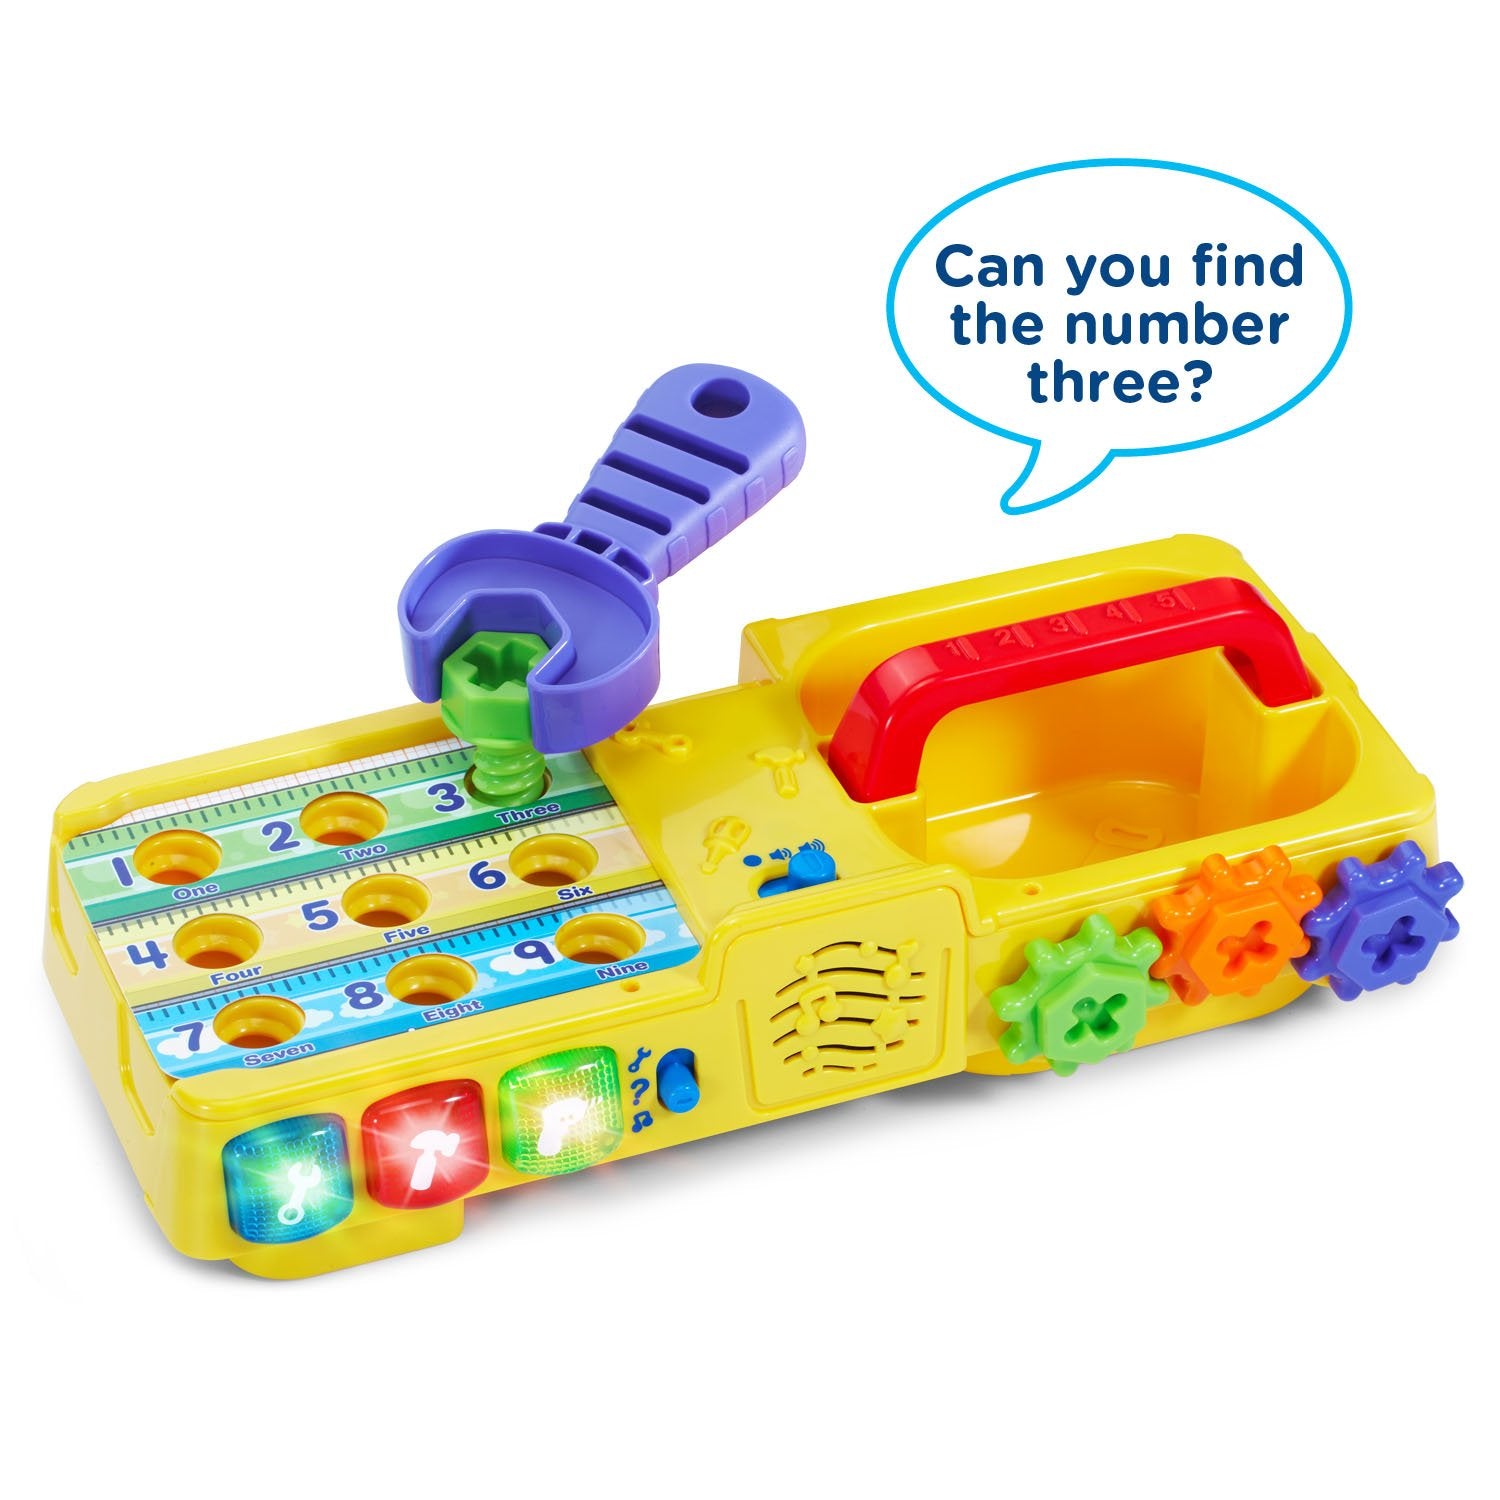 VTech Drill and Learn Toolbox, Multicolor